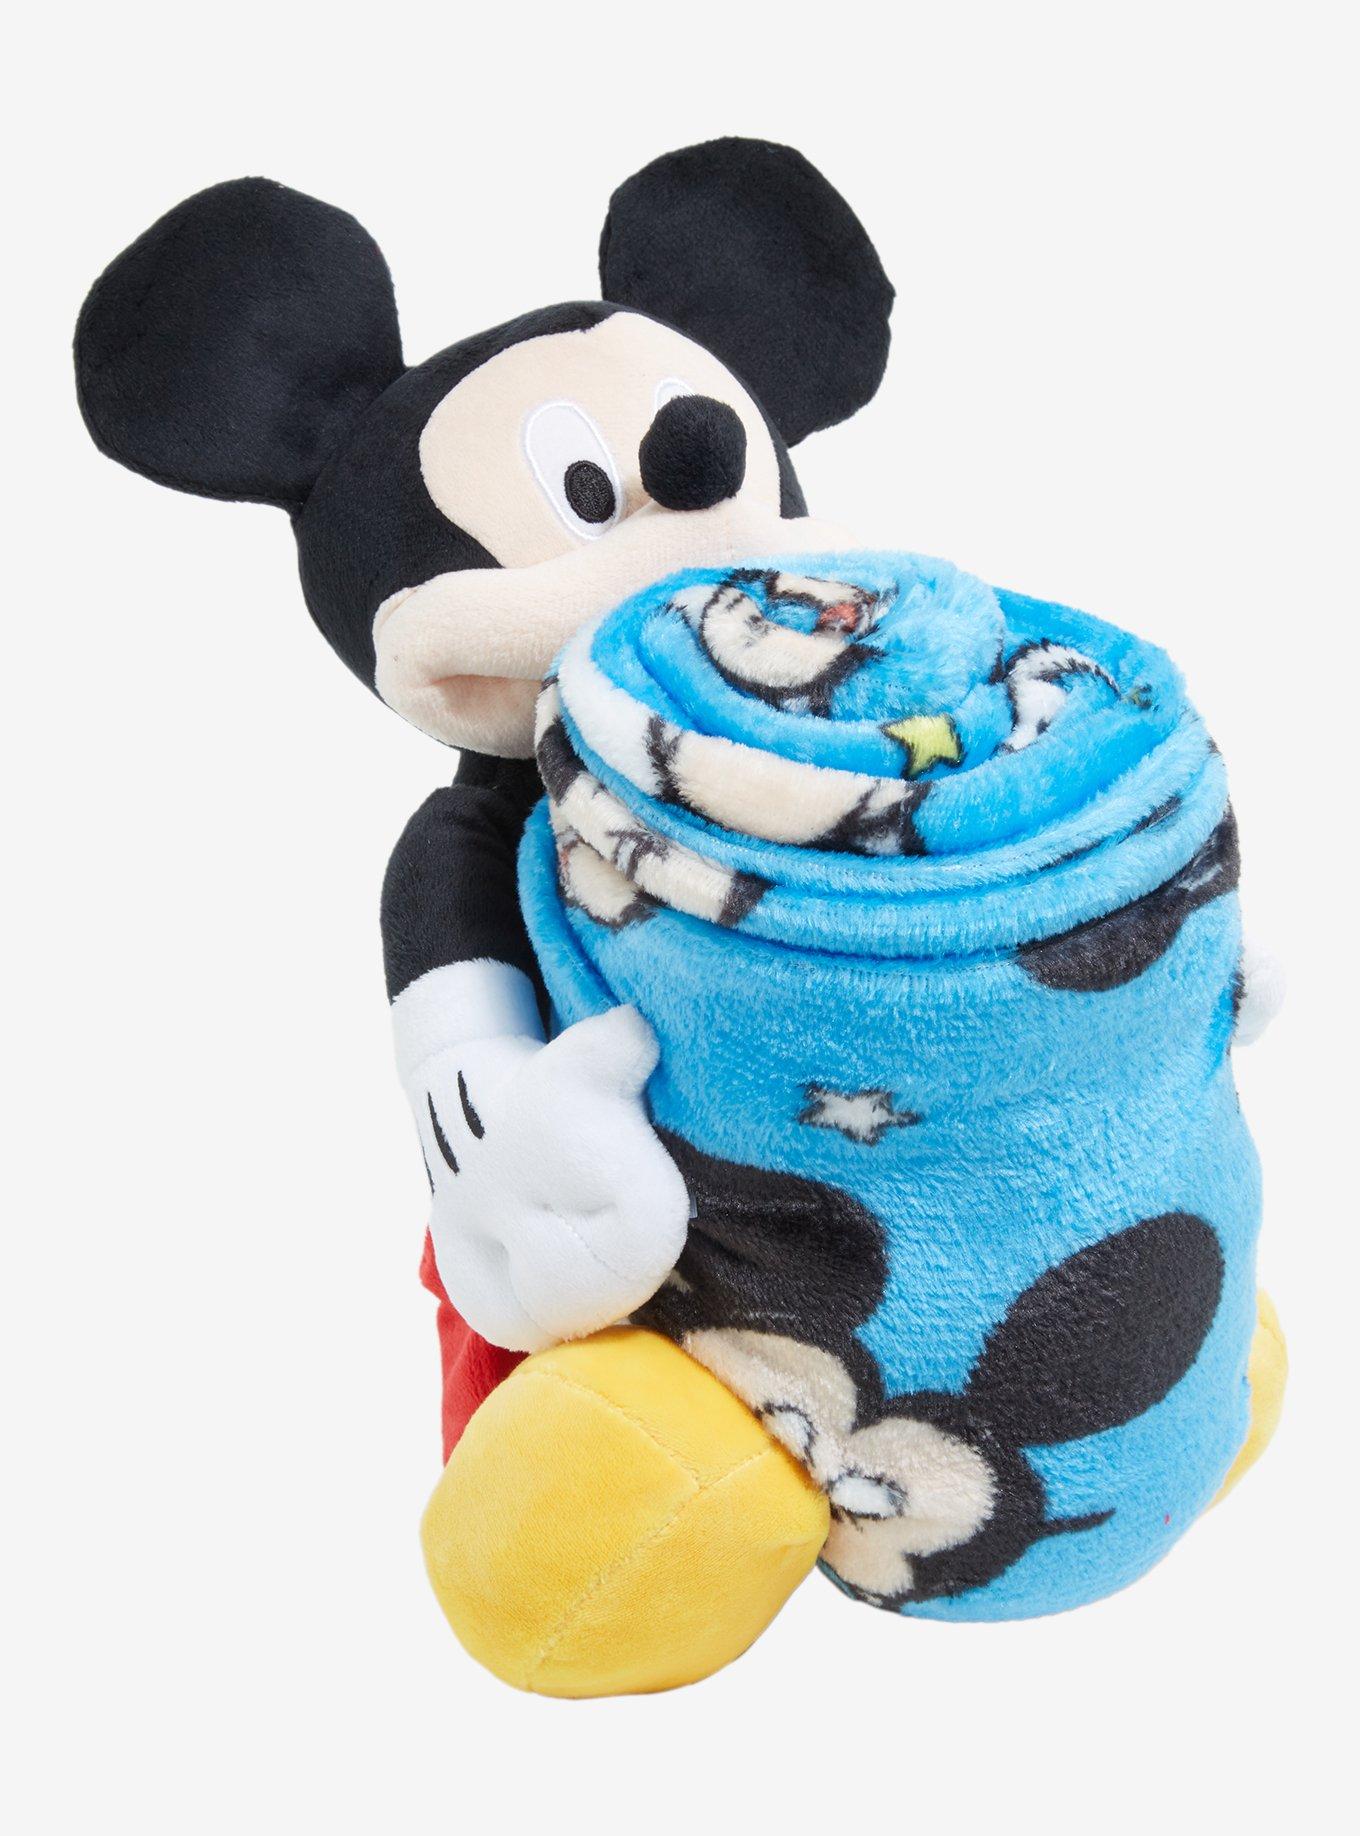 Disney Mickey Mouse Character Hugger Pillow & Silk Touch Throw Set